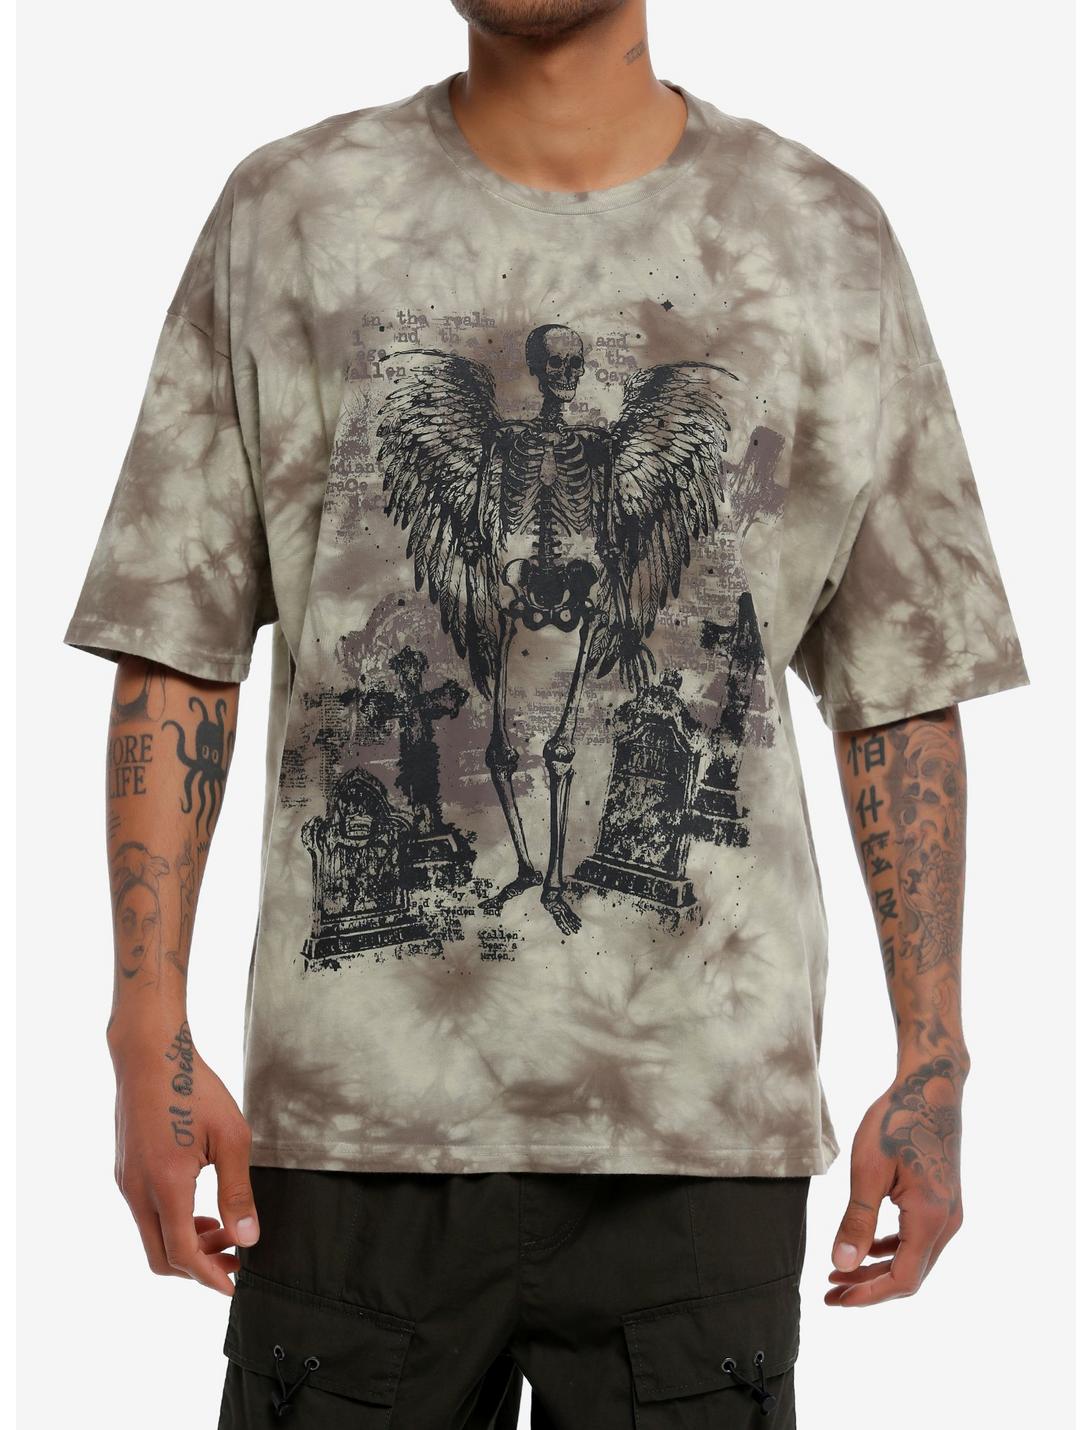 Thorn & Fable Winged Skeleton Cemetery Tie-Dye T-Shirt, GREY, hi-res